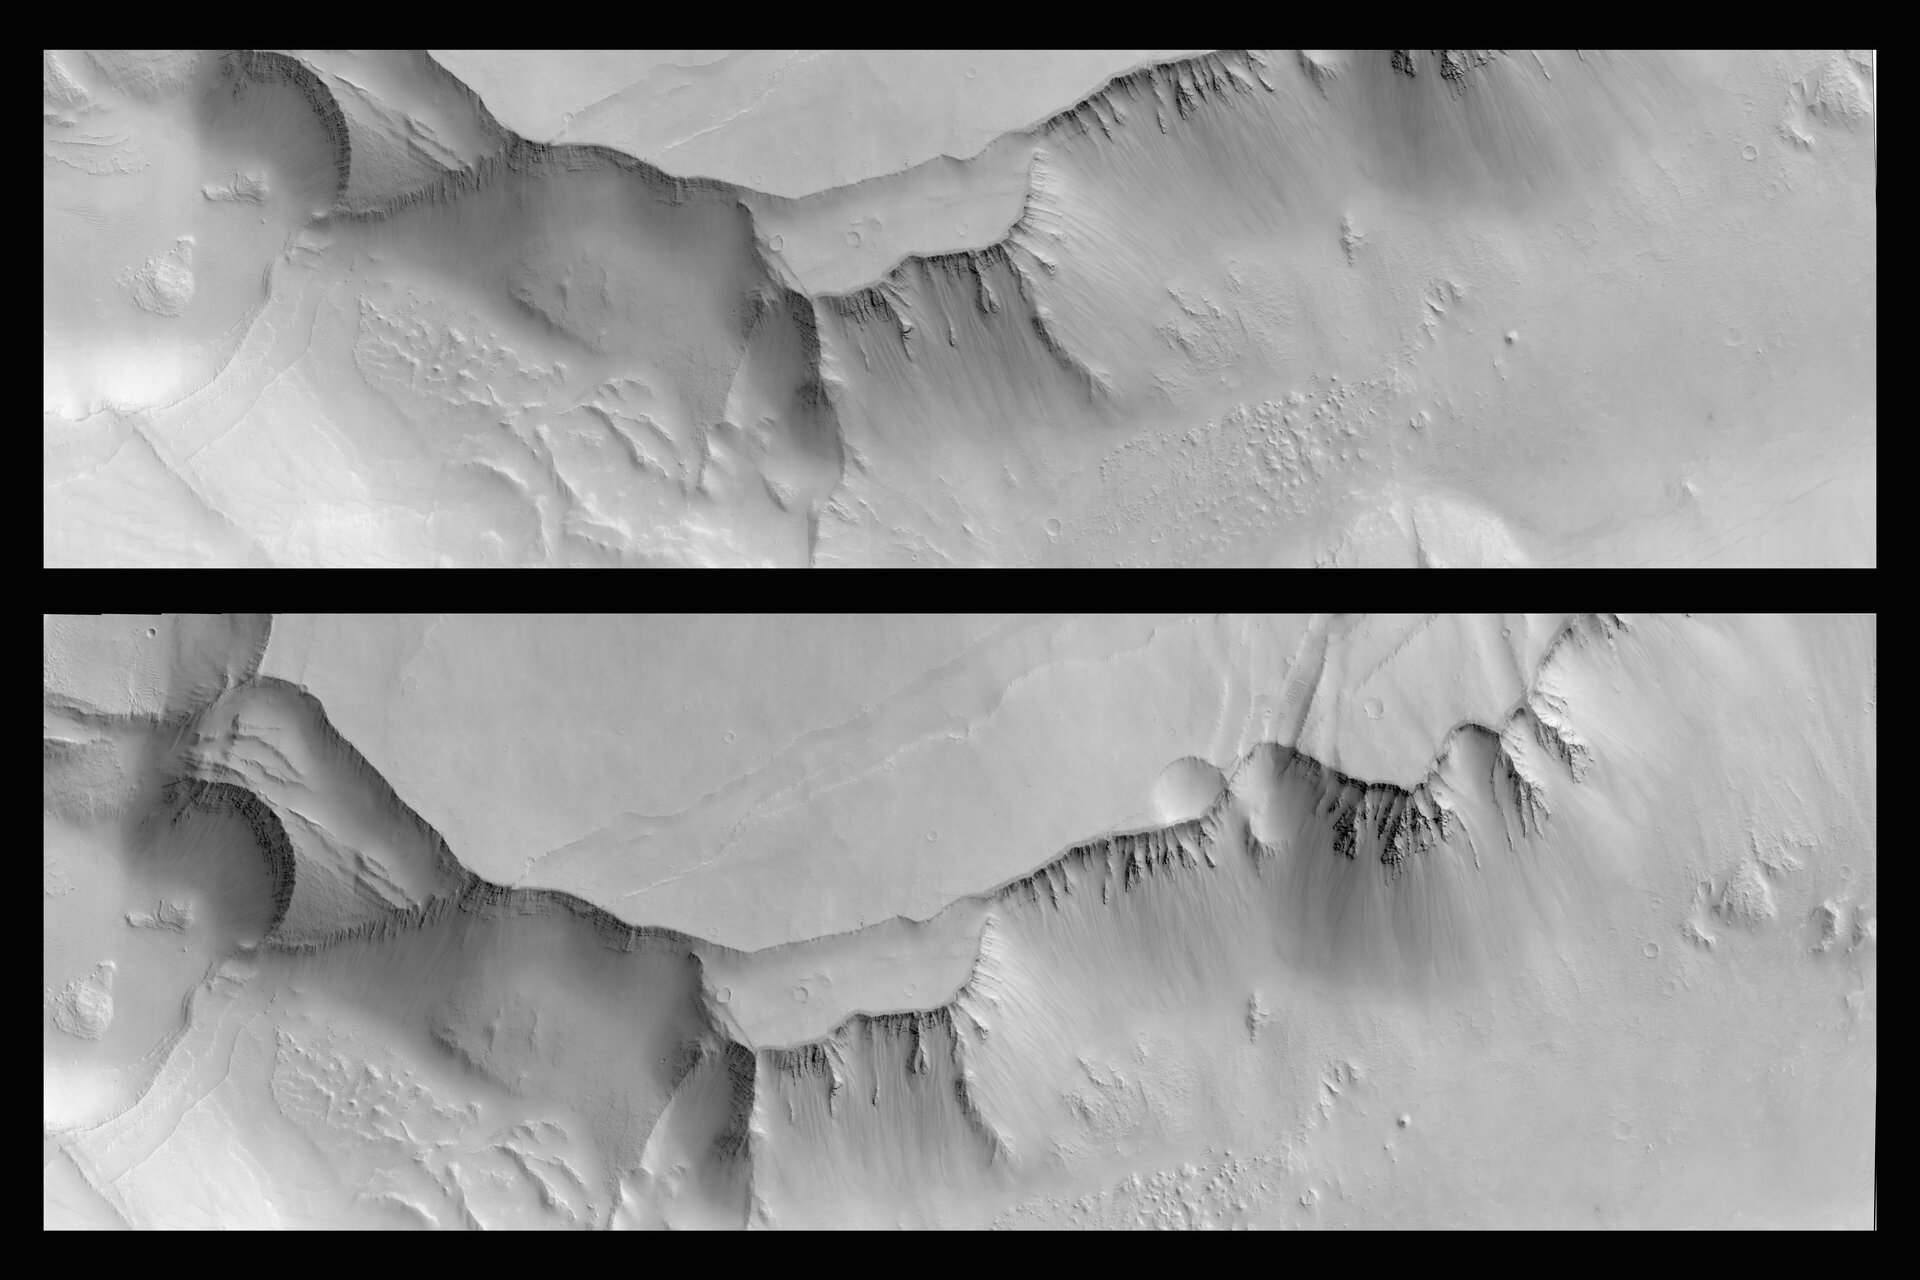 Noctis Labyrinthus stereo pair